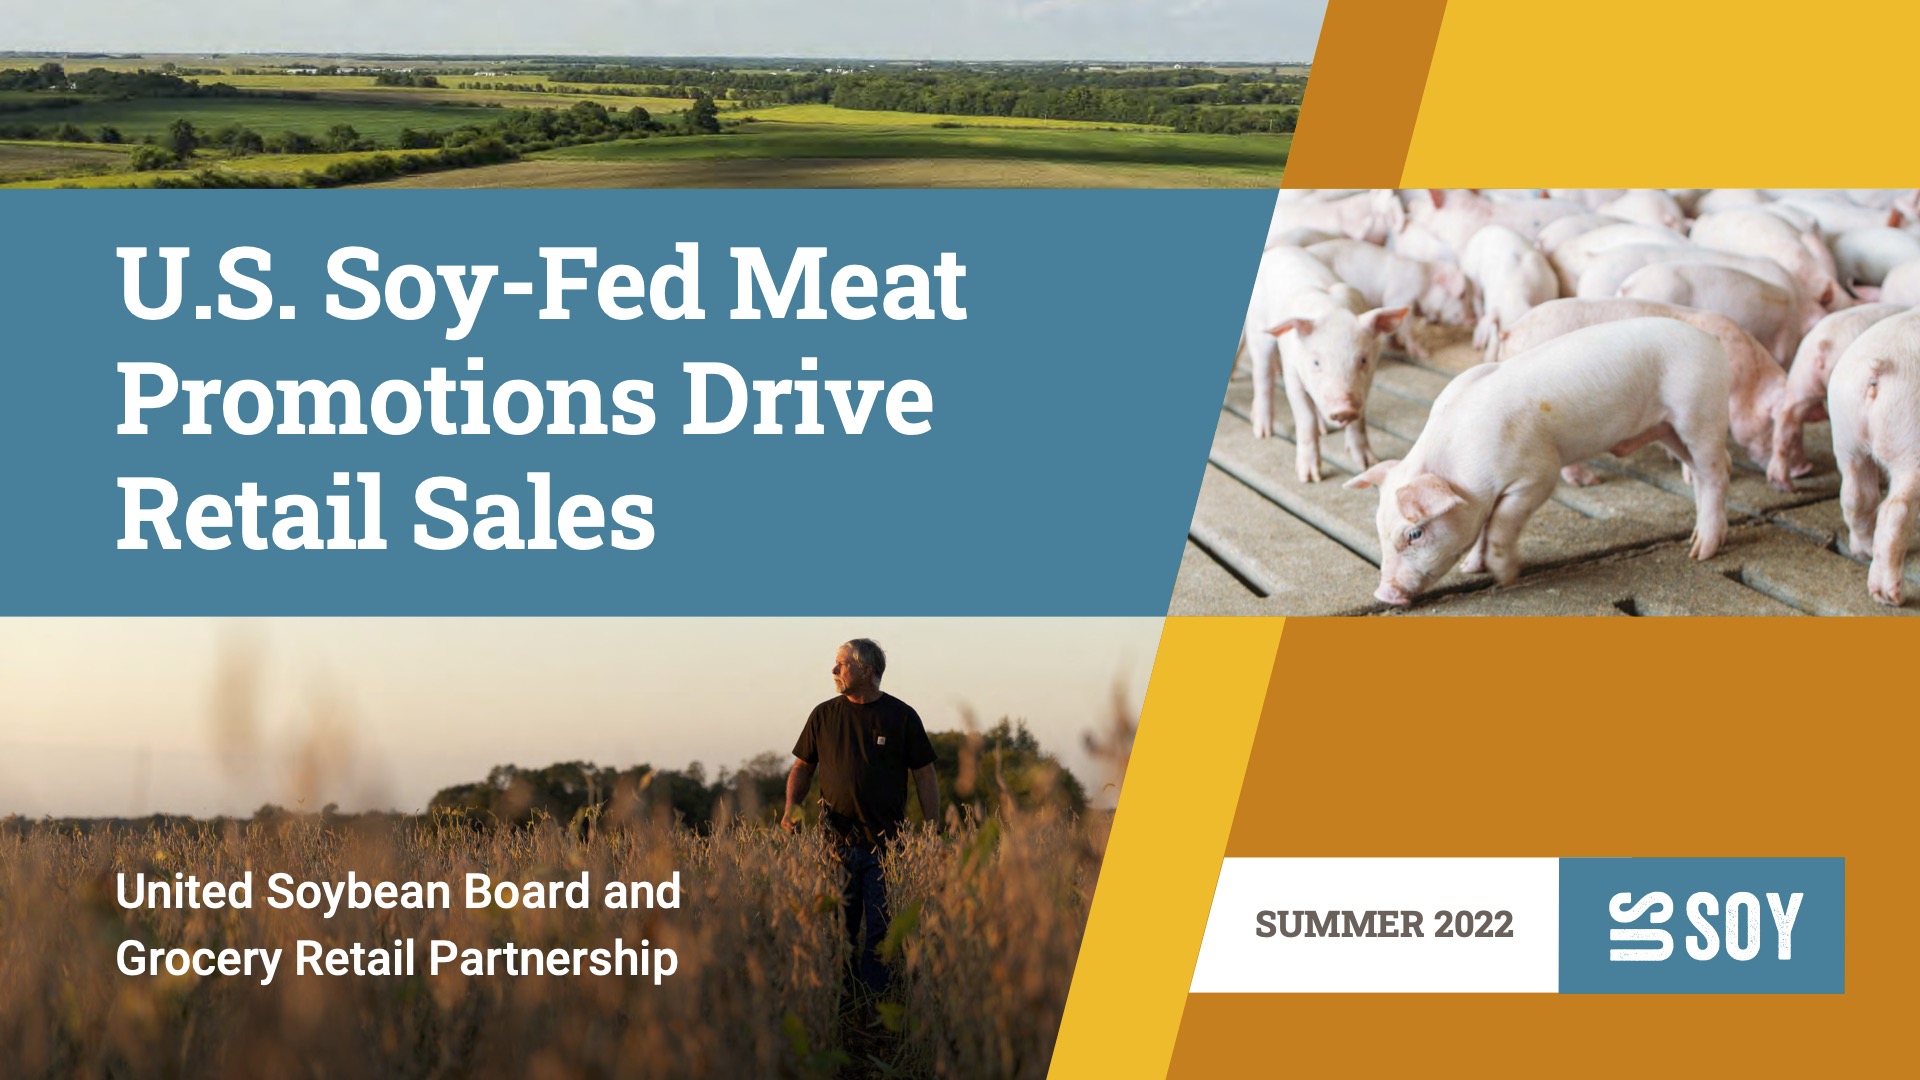 U.S. Soy-Fed Pork Promotions Drive Retail Sales